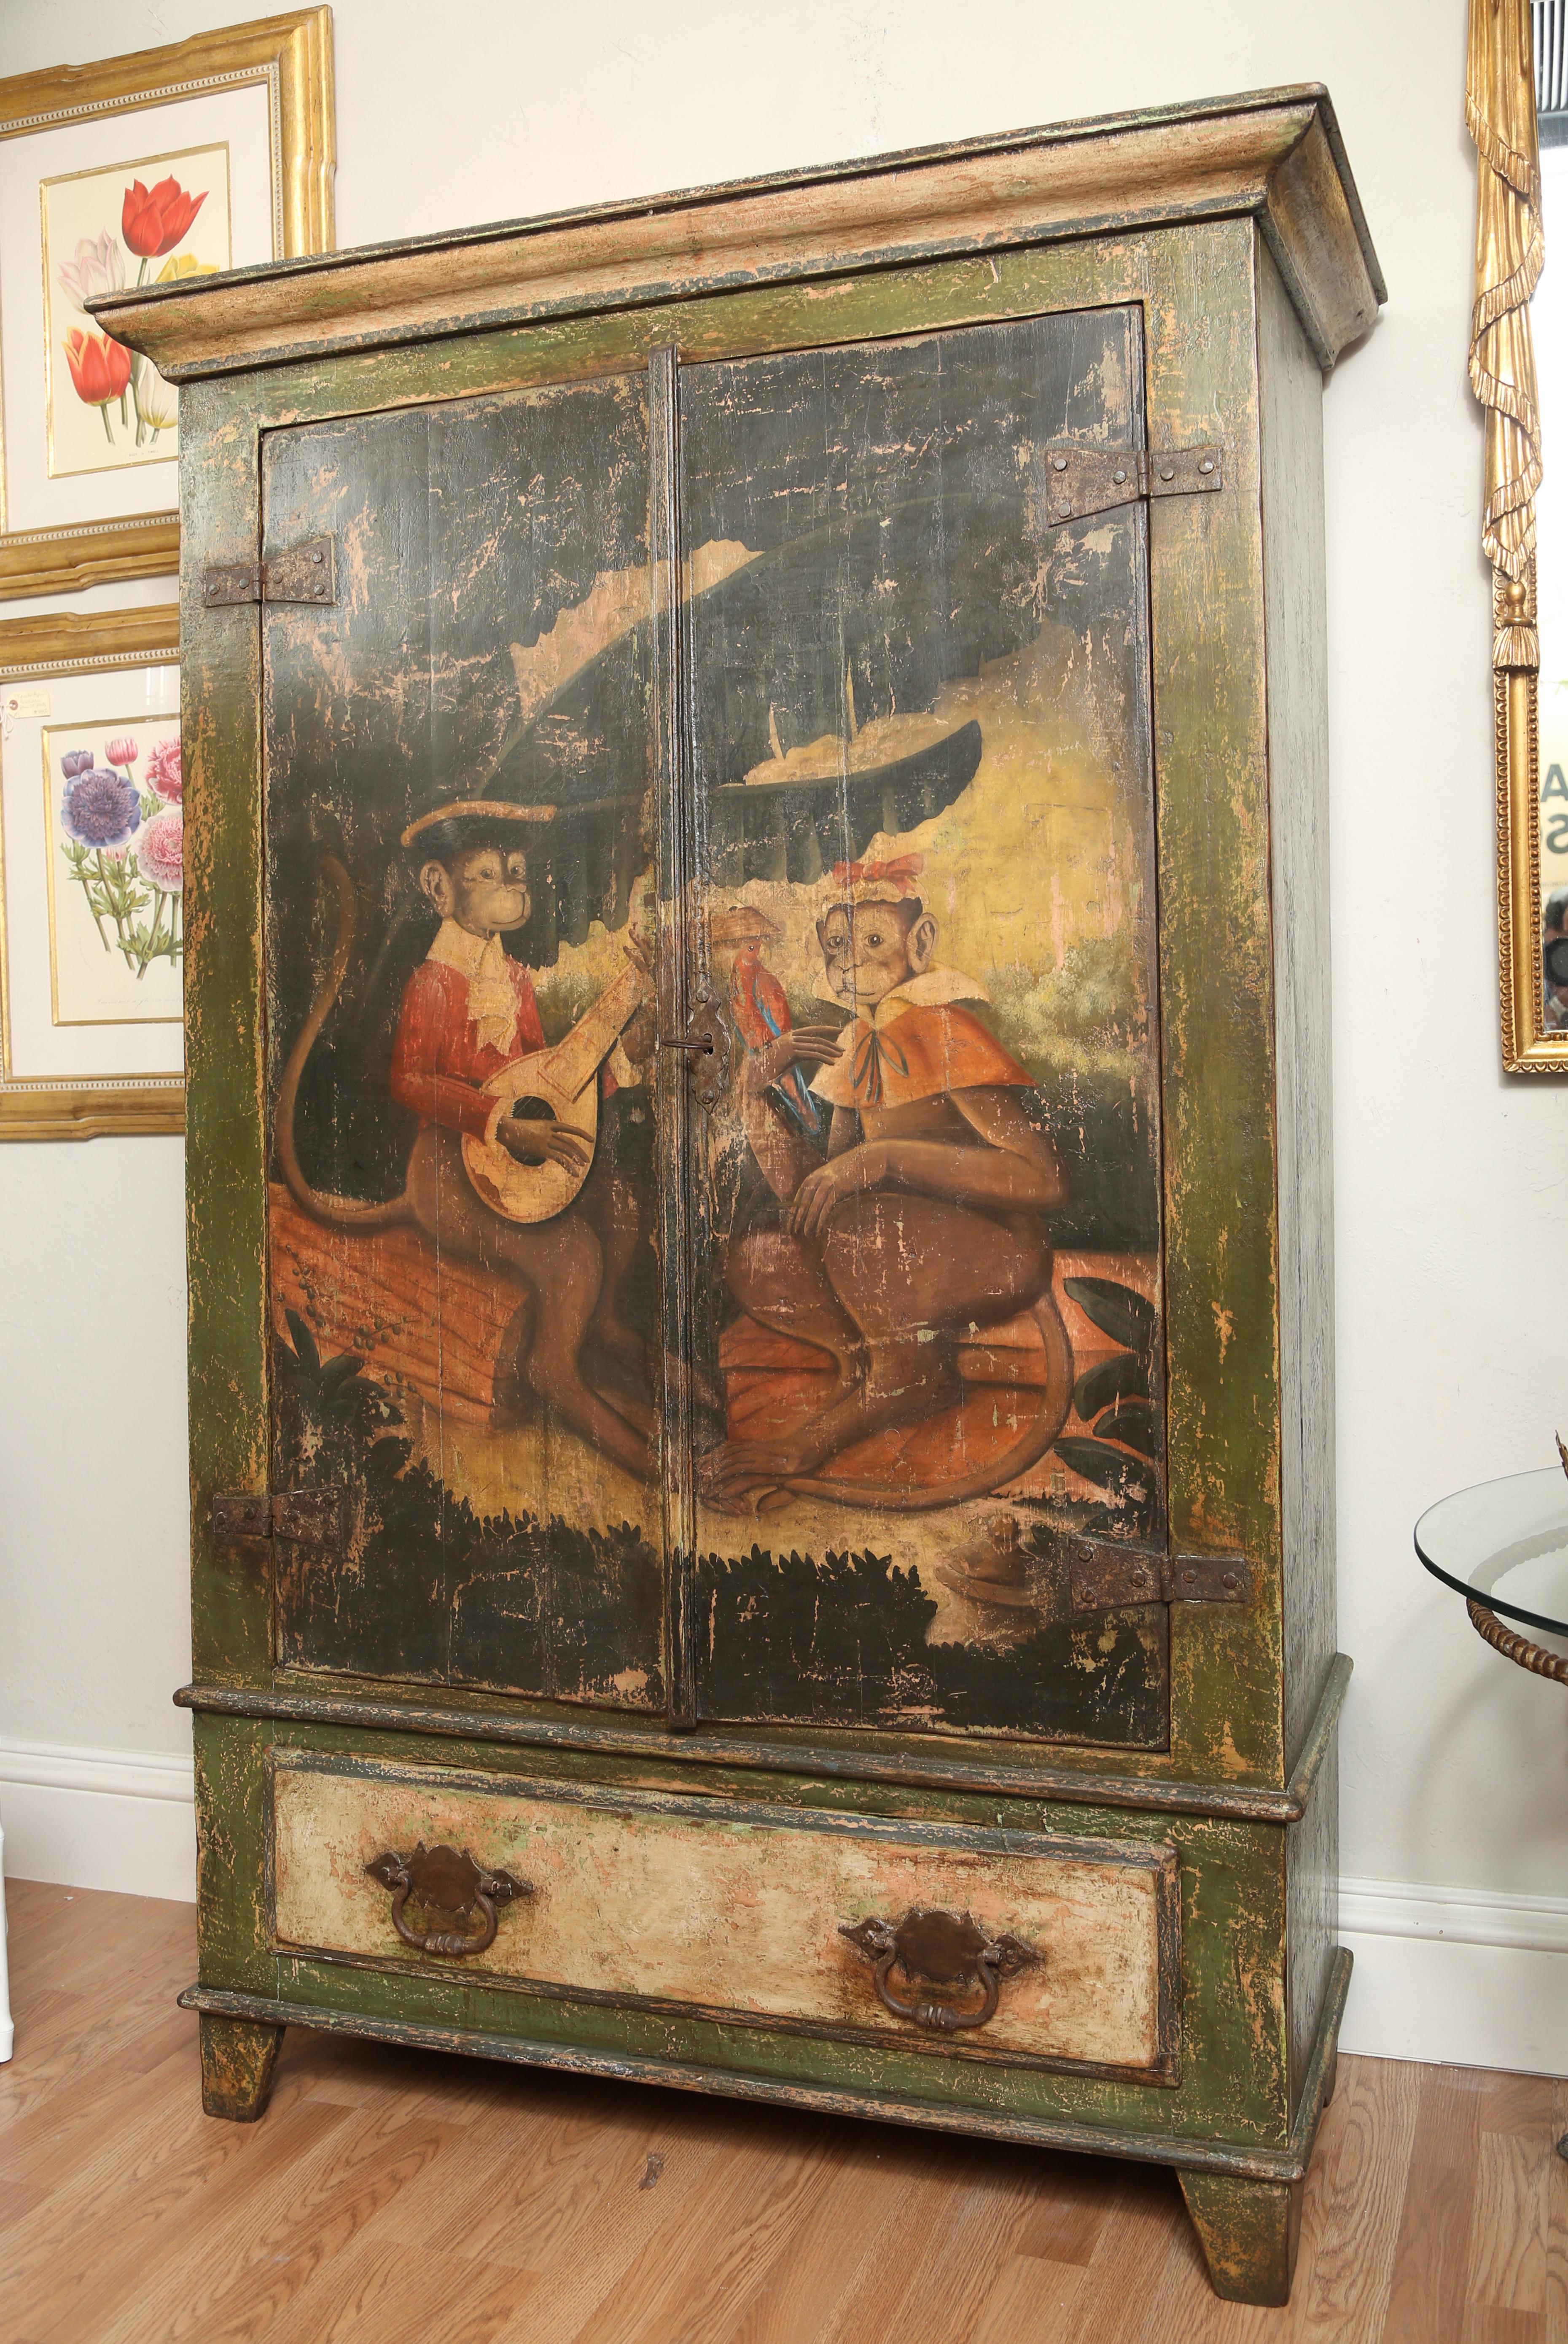 Hand painted two-door cupboard with two monkey's courting.
Three inner shelves and one large drawer at bottom.